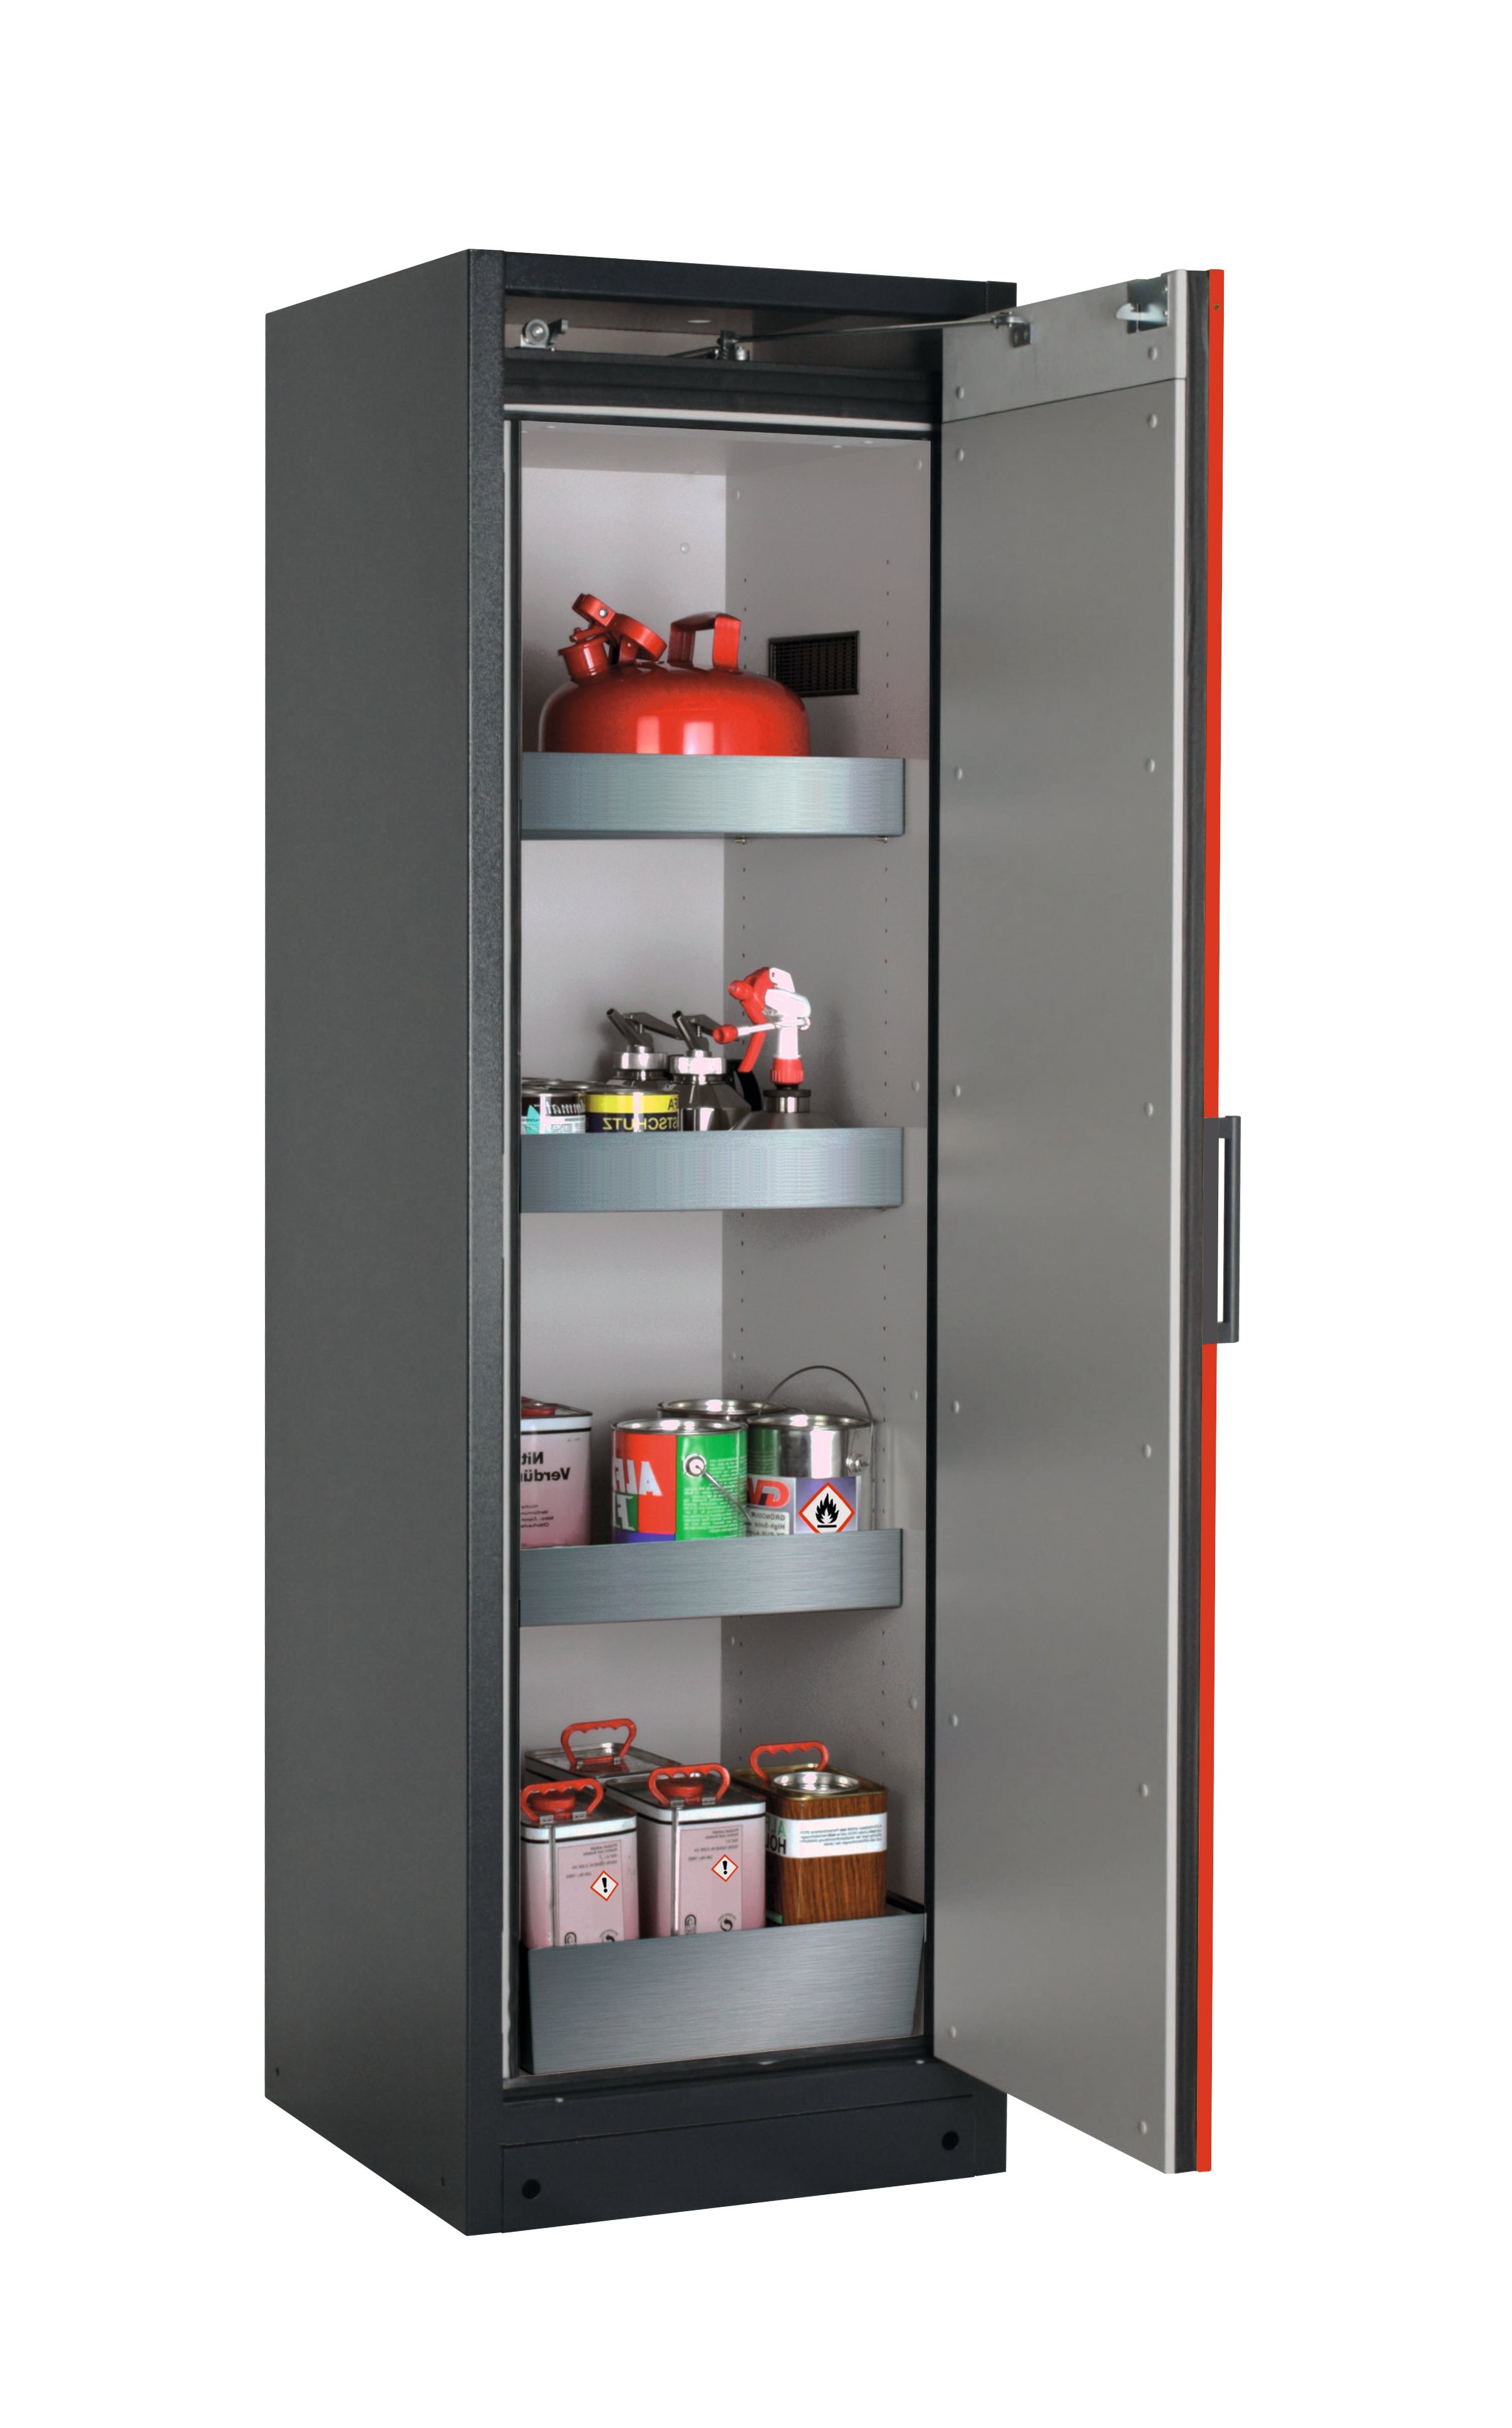 Type 90 safety storage cabinet Q-CLASSIC-90 model Q90.195.060.R in traffic red RAL 3020 with 3x tray shelf (standard) (stainless steel 1.4301),